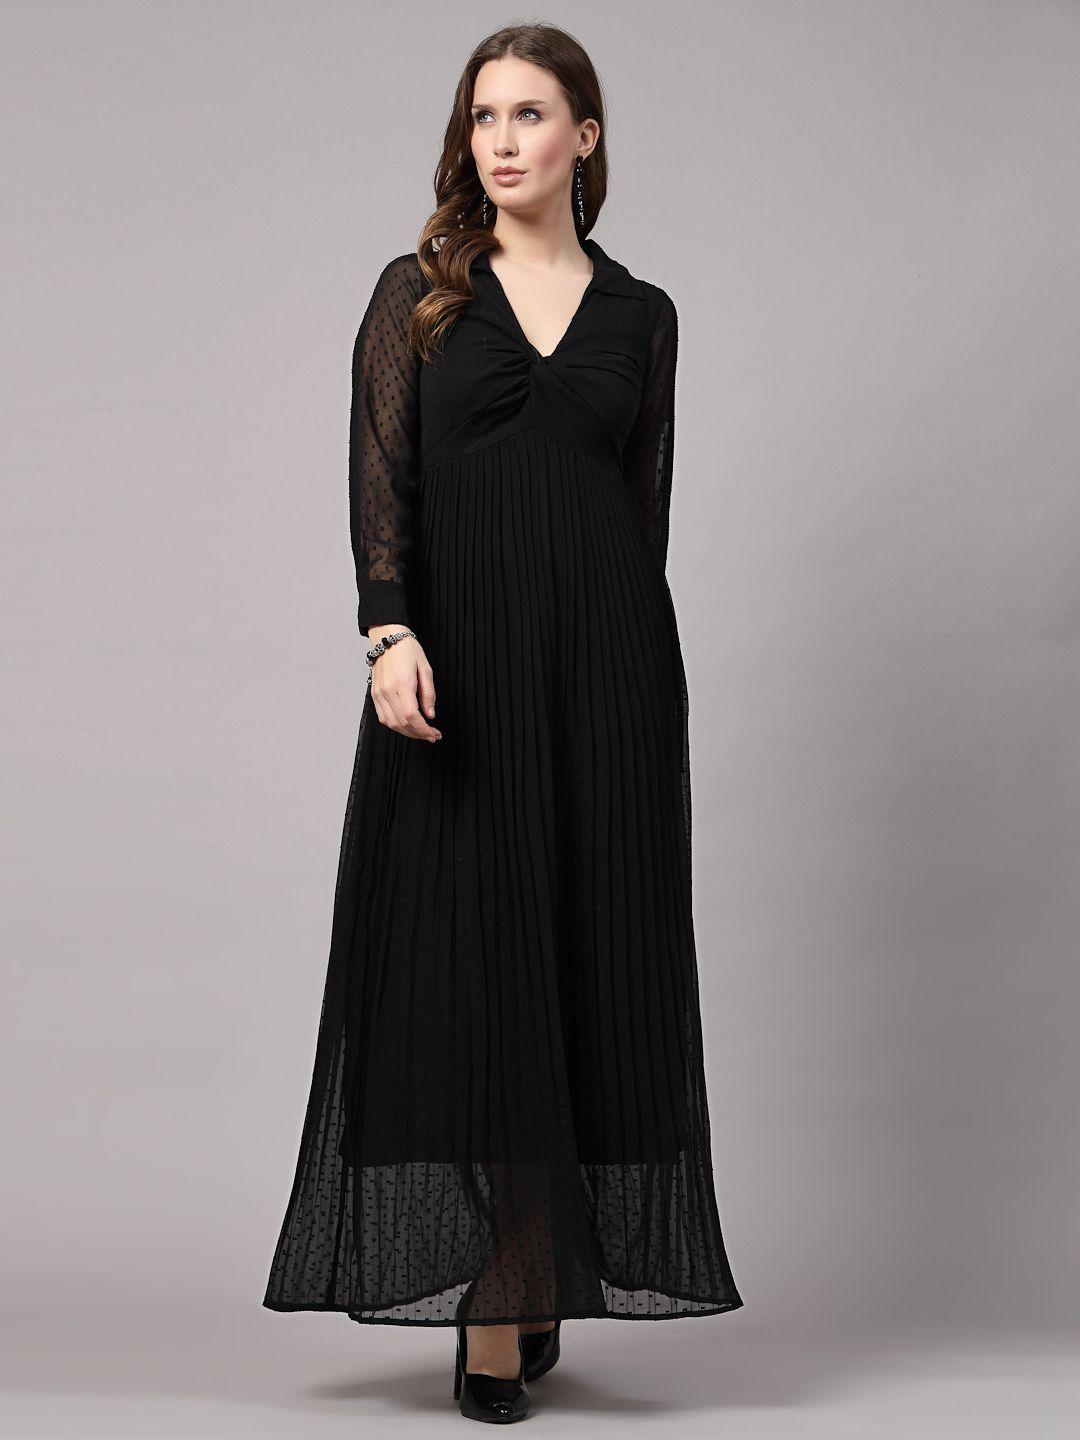 aayu-v-neck-opaque-georgette-maxi-dress